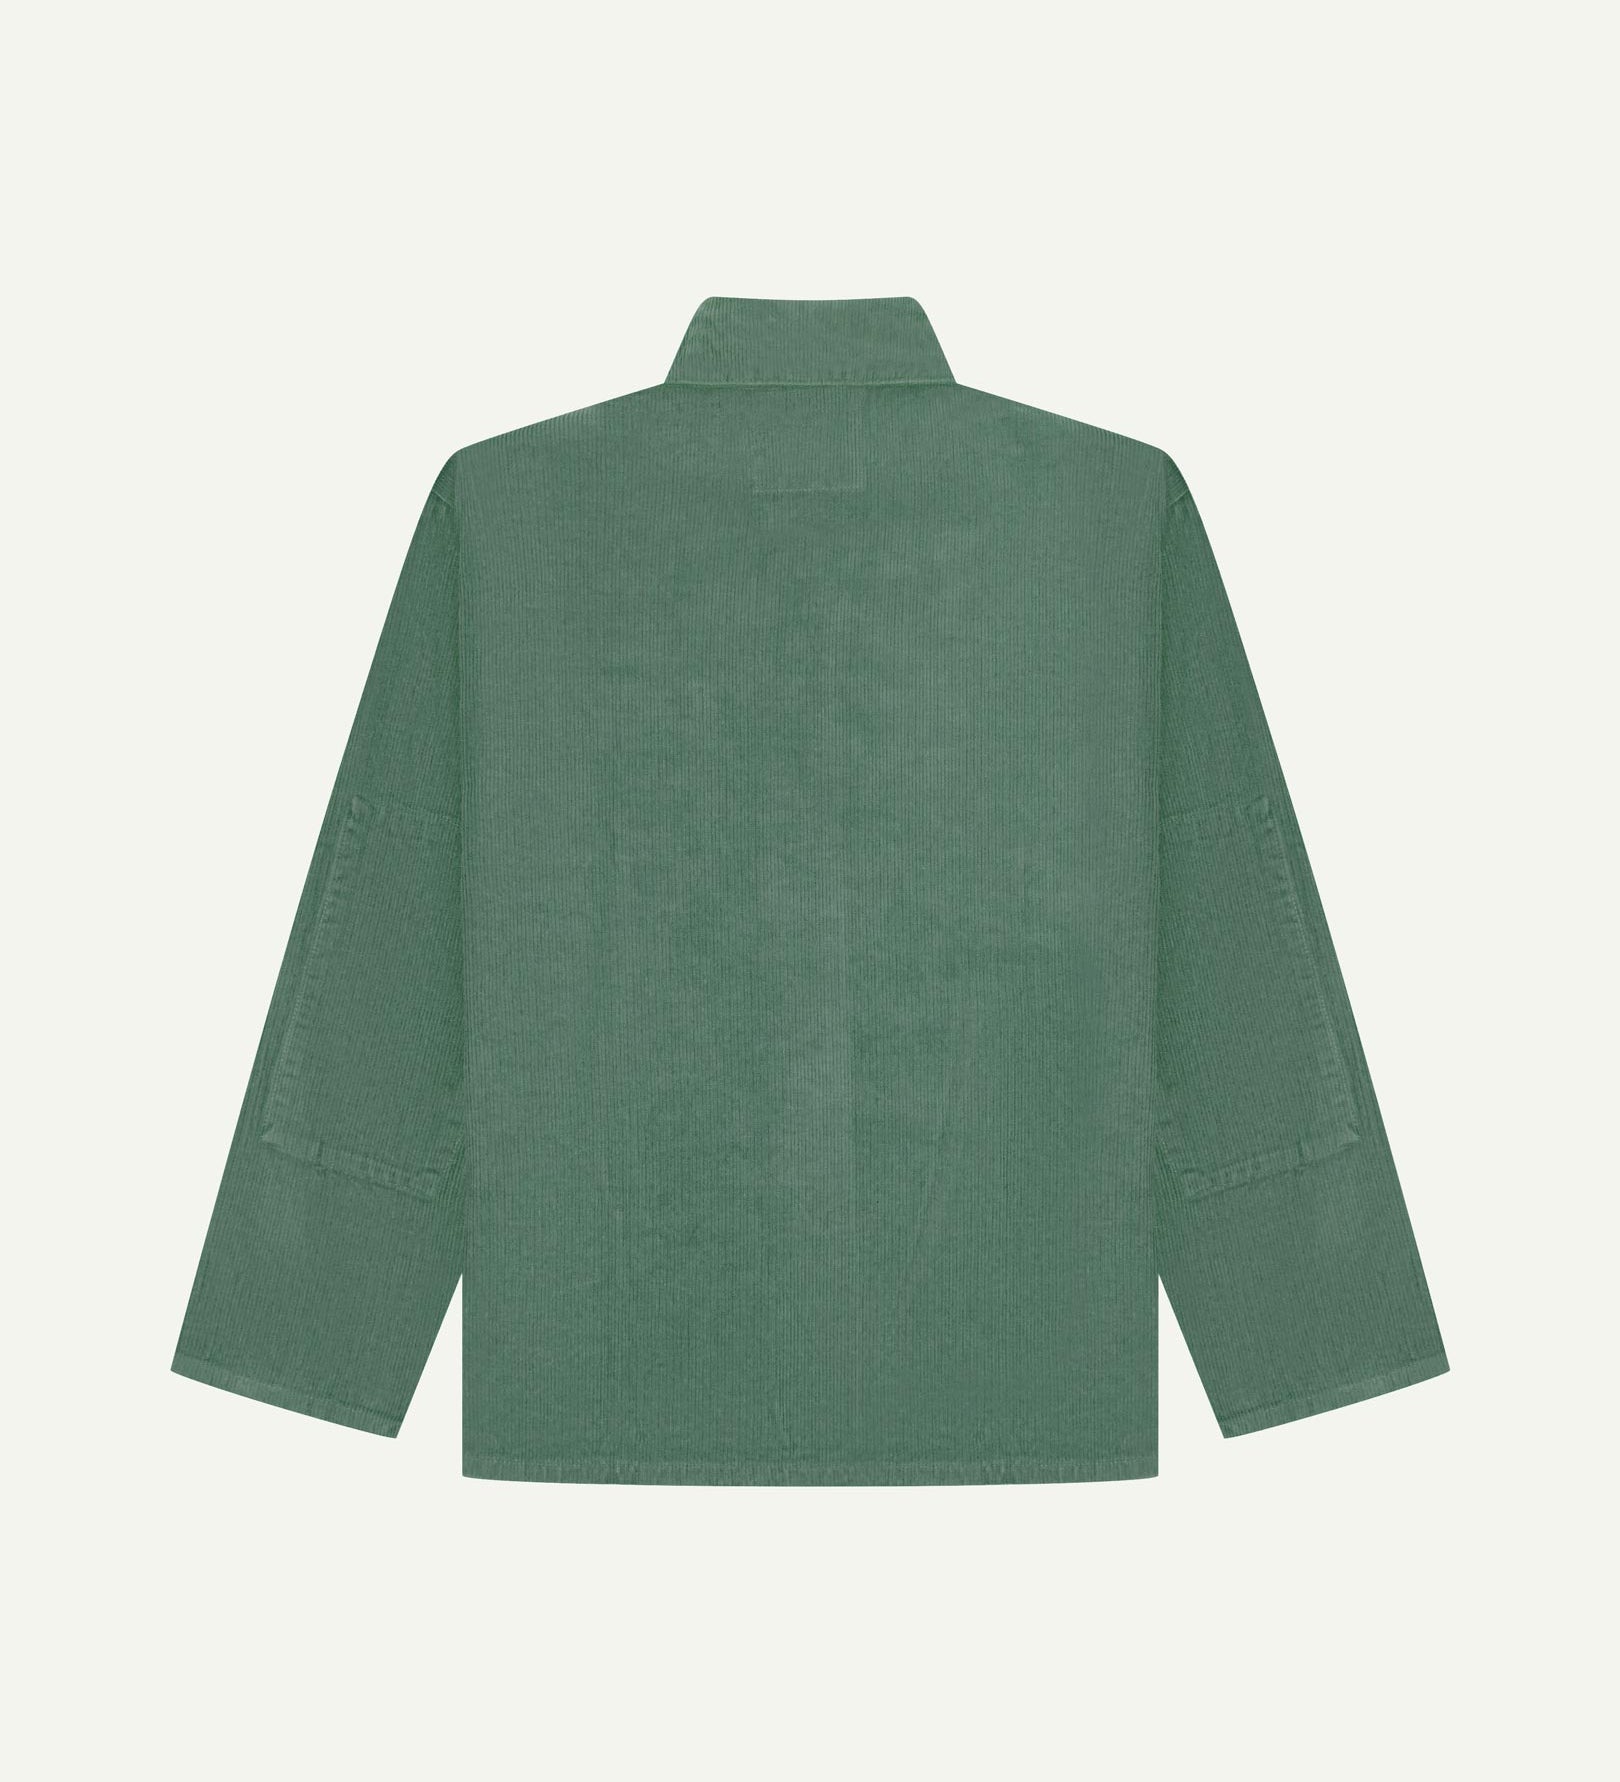 Back view of light green, buttoned corduroy overshirt with view of reinforced elbow area and boxy silhouette.